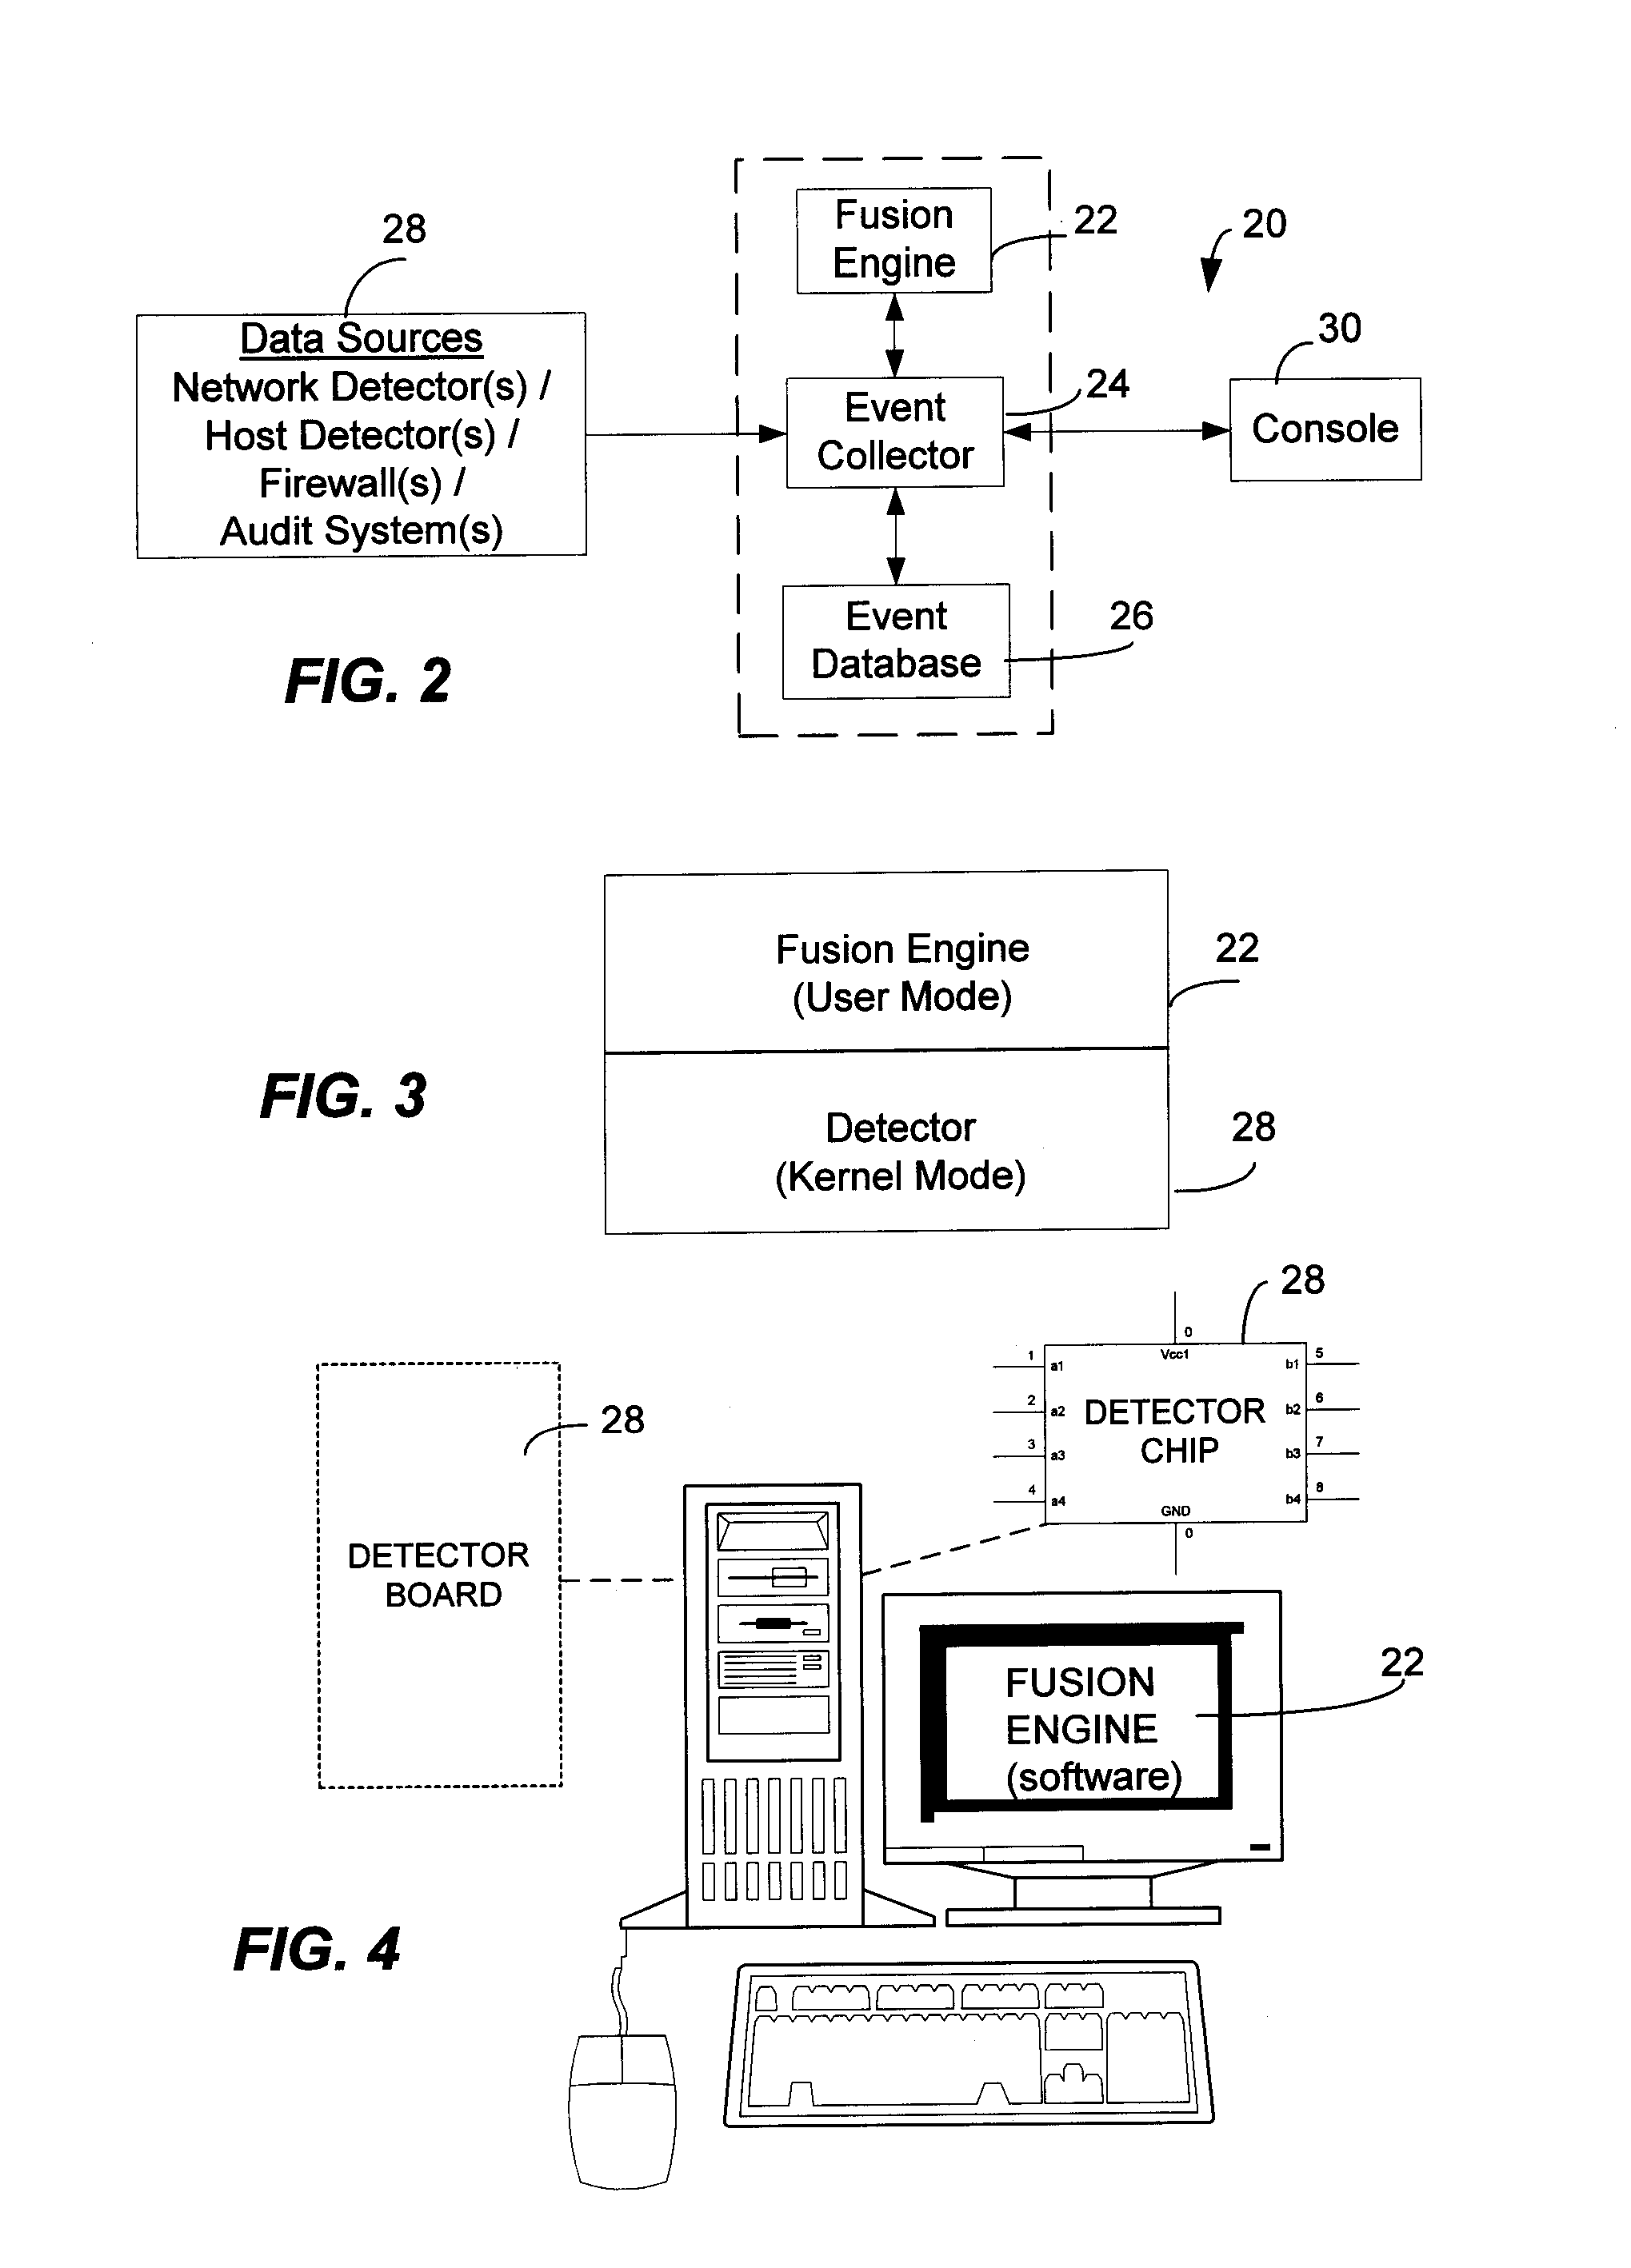 Method and System for Managing Computer Security Information